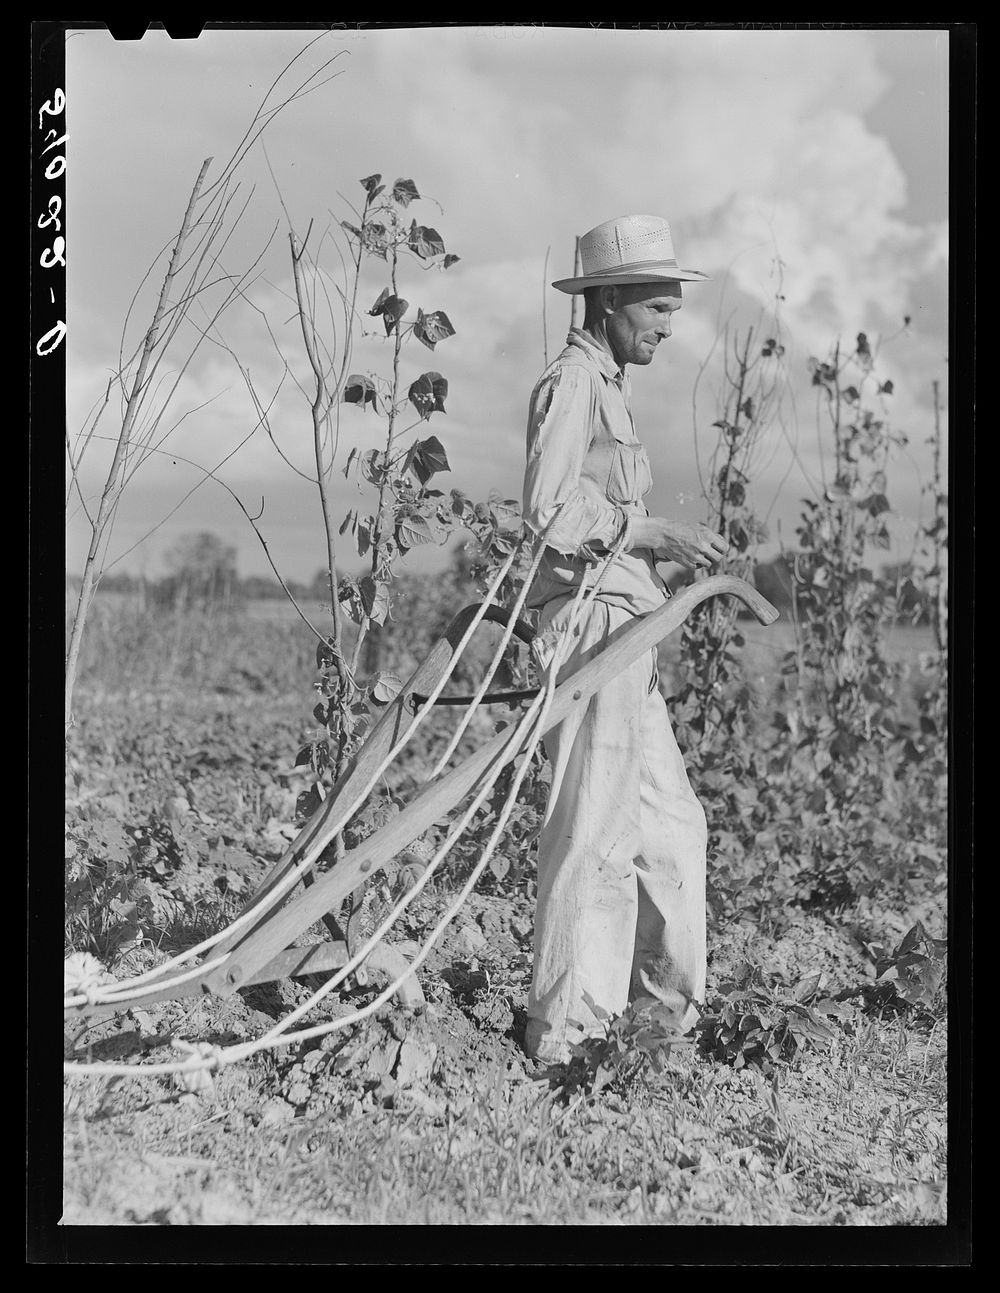 Mr. Thomas G. Smith lets his mule cool off while cultivating in his garden. Transylvania Project, Louisiana. Sourced from…